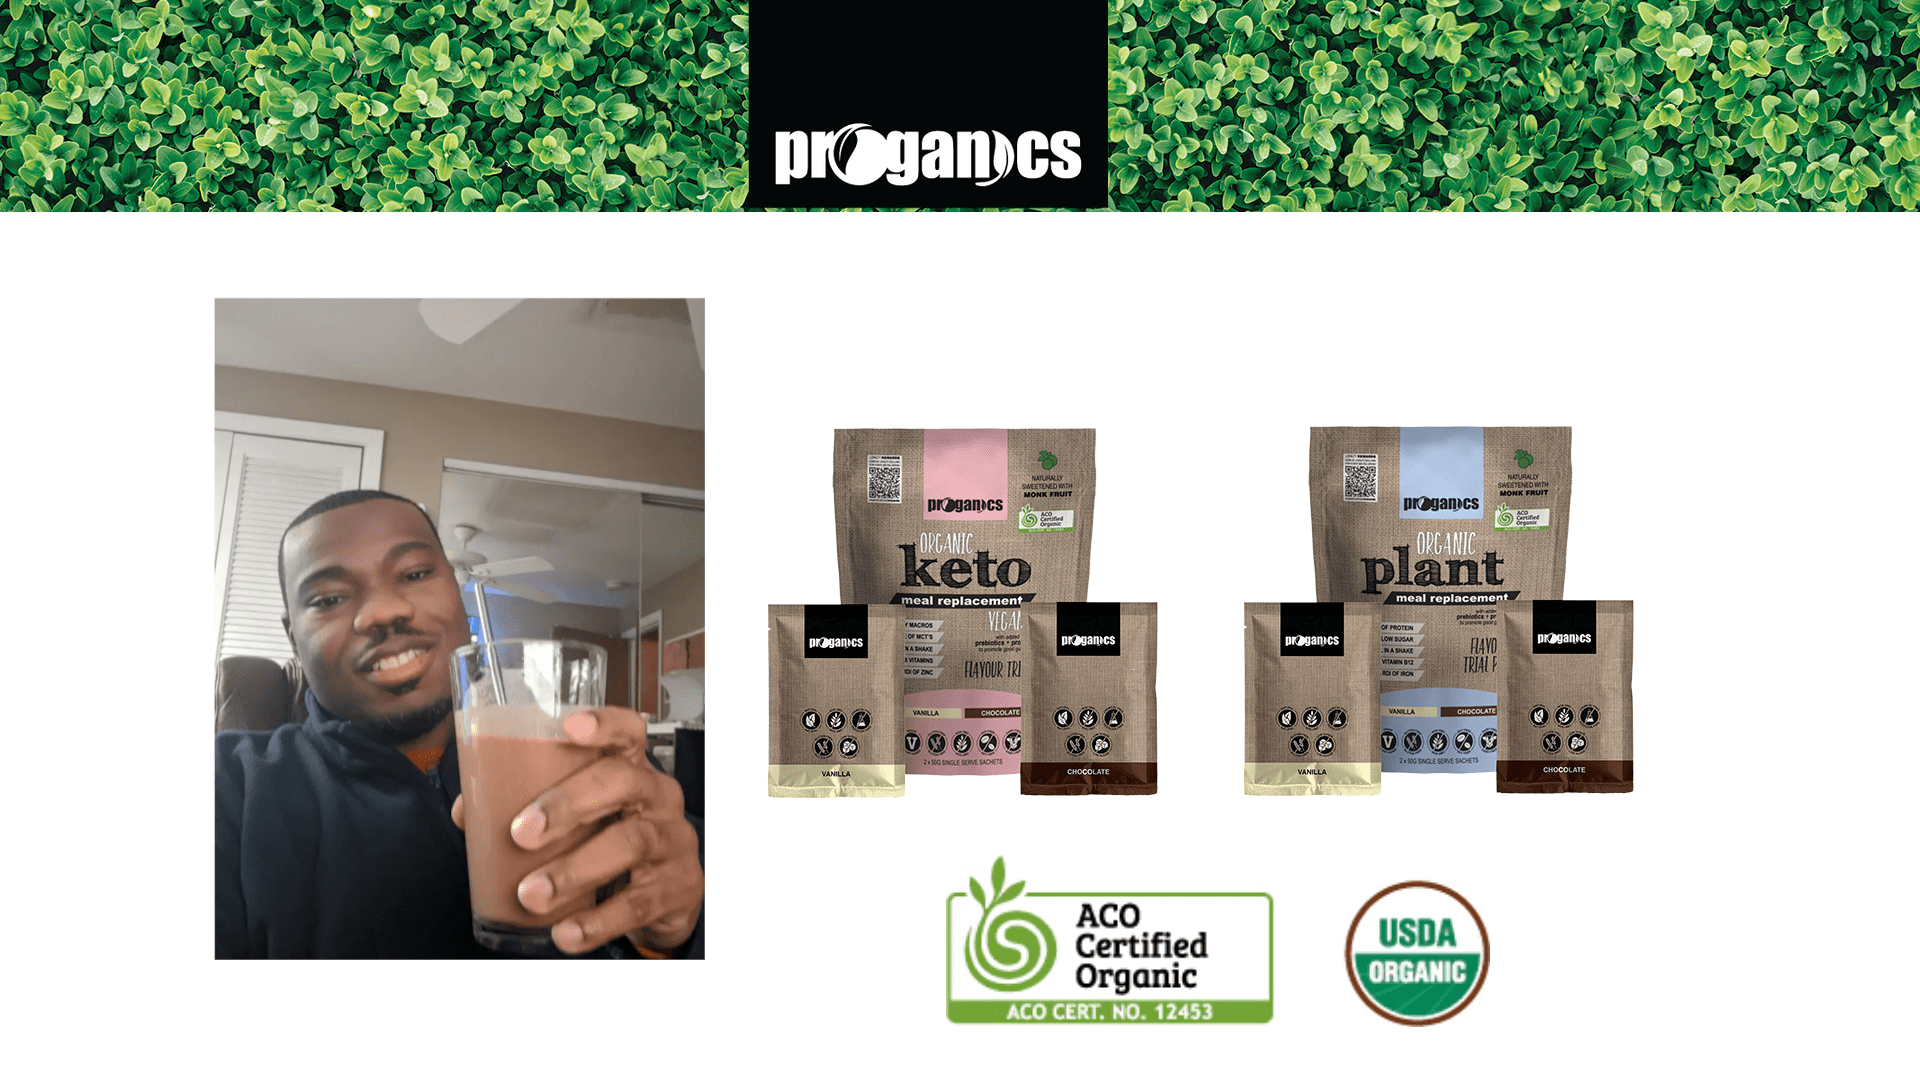 Proganics Meal replacement review